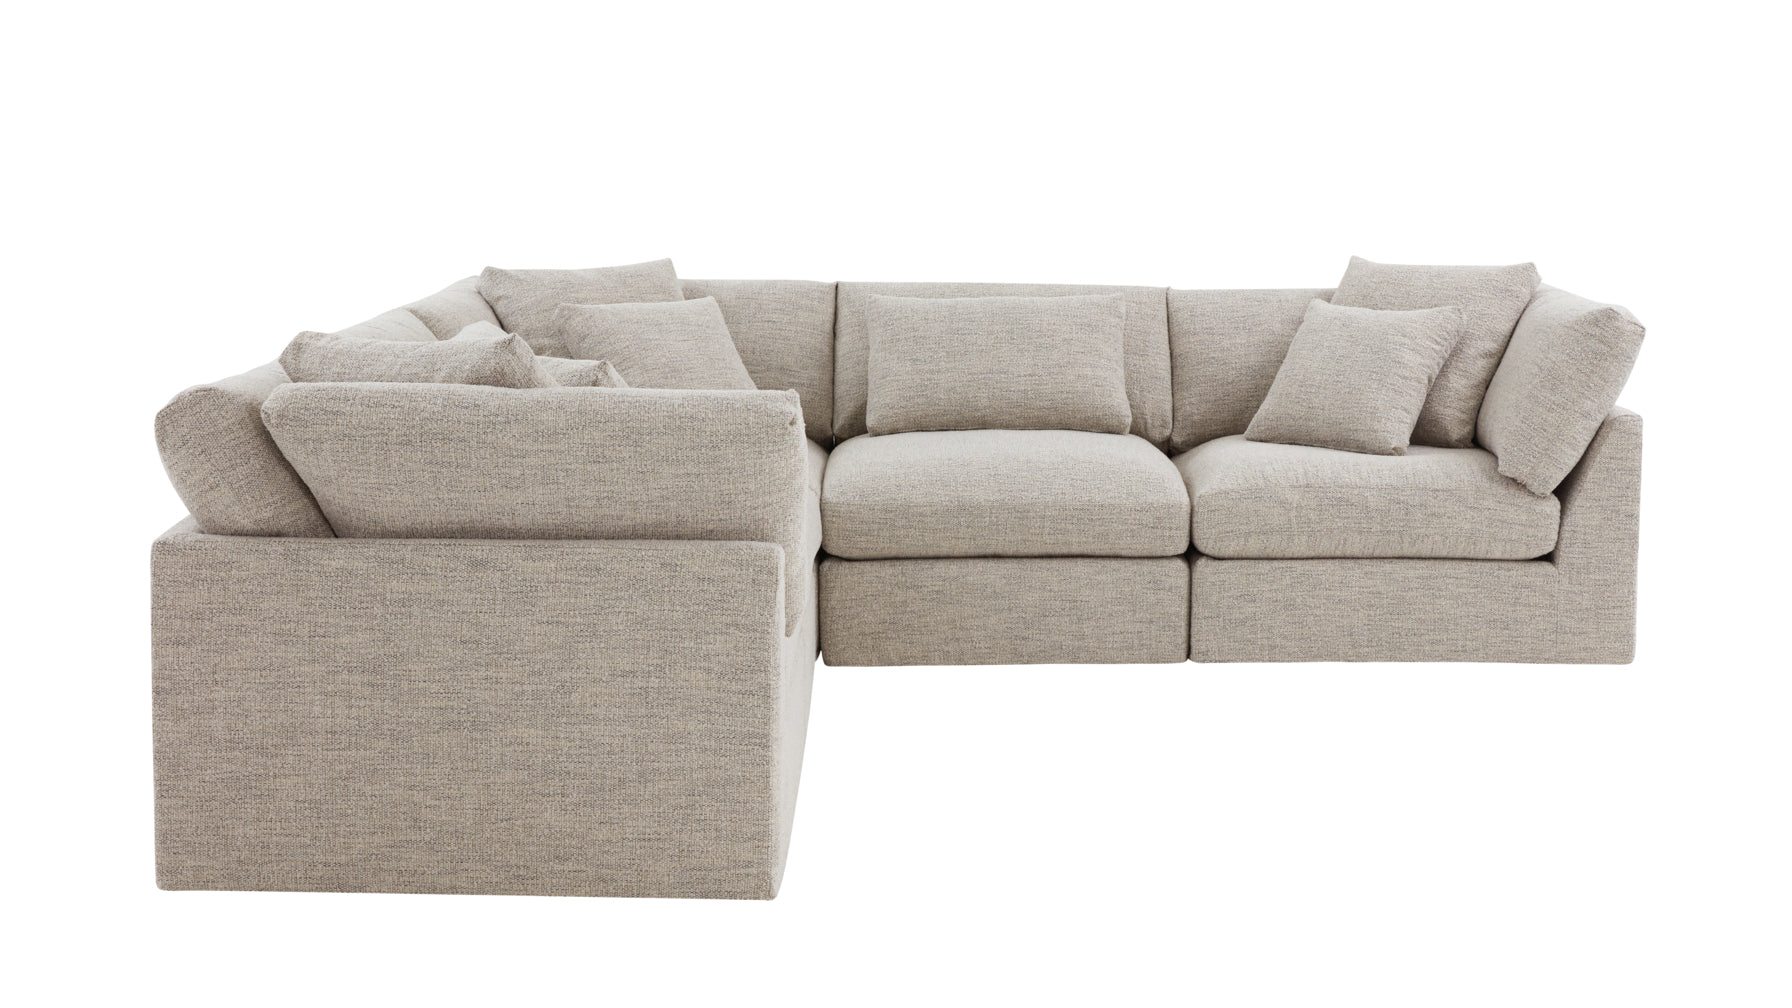 Get Together™ 5-Piece Modular Sectional Closed, Large, Oatmeal - Image 5